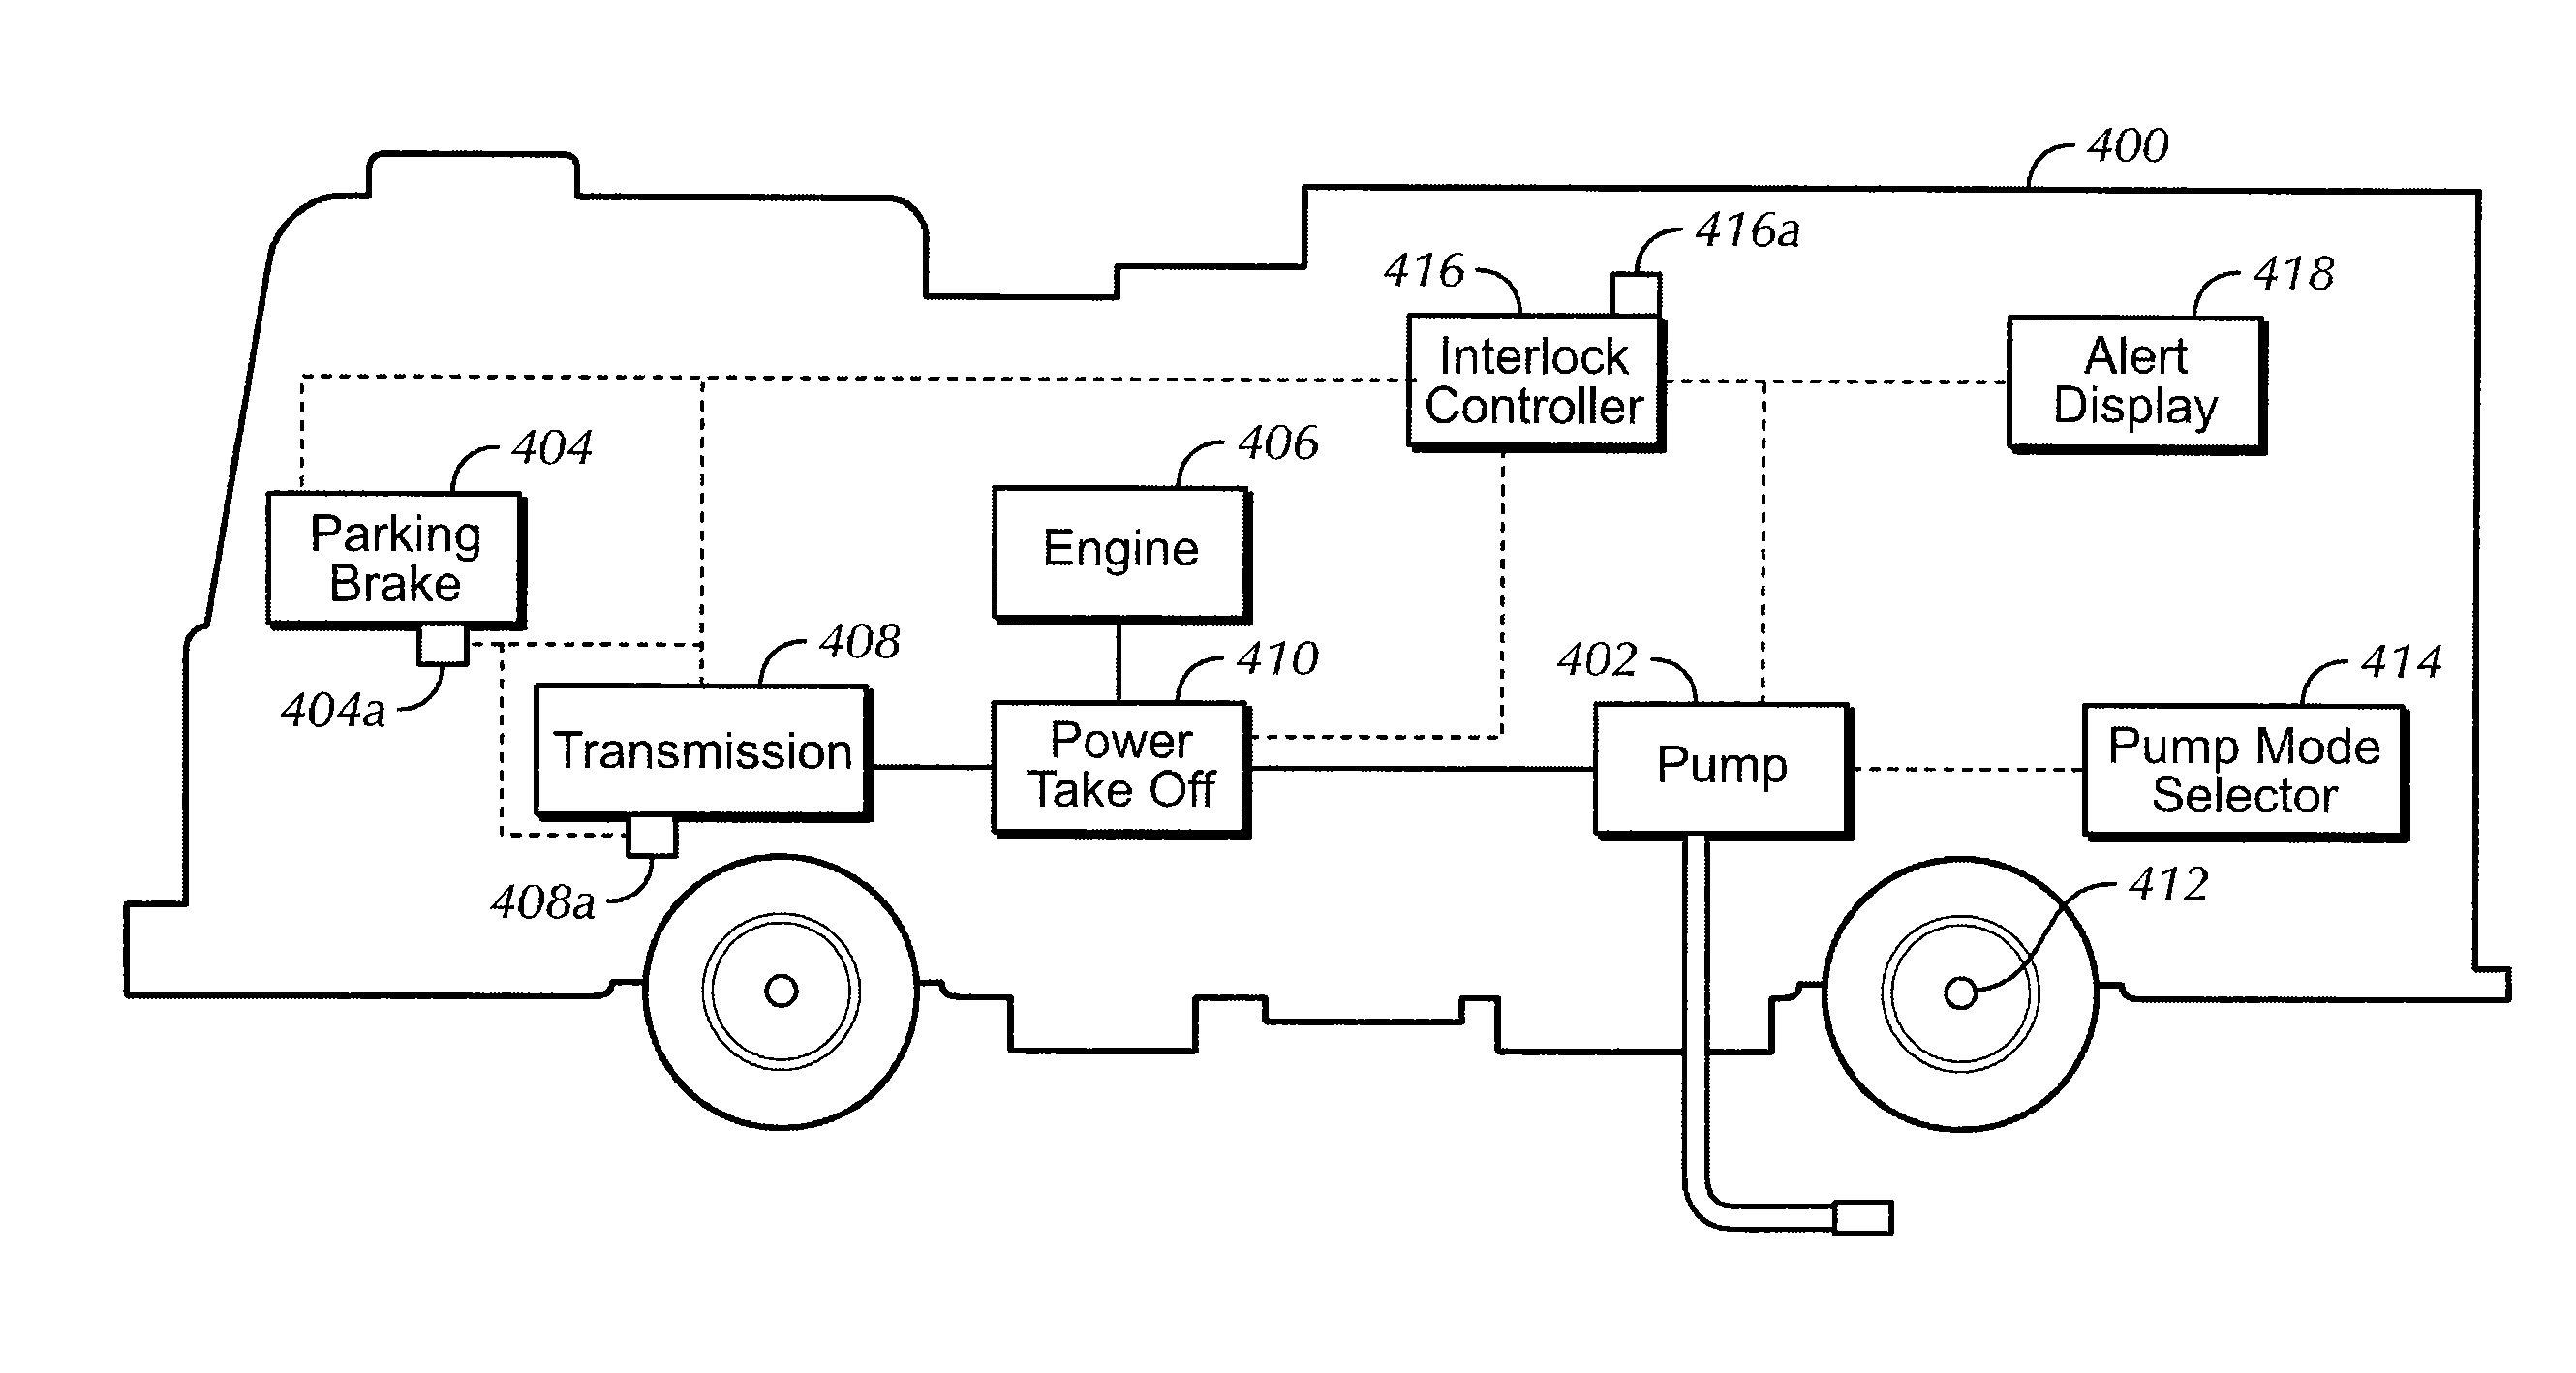 Integrated controls for a fire suppression system